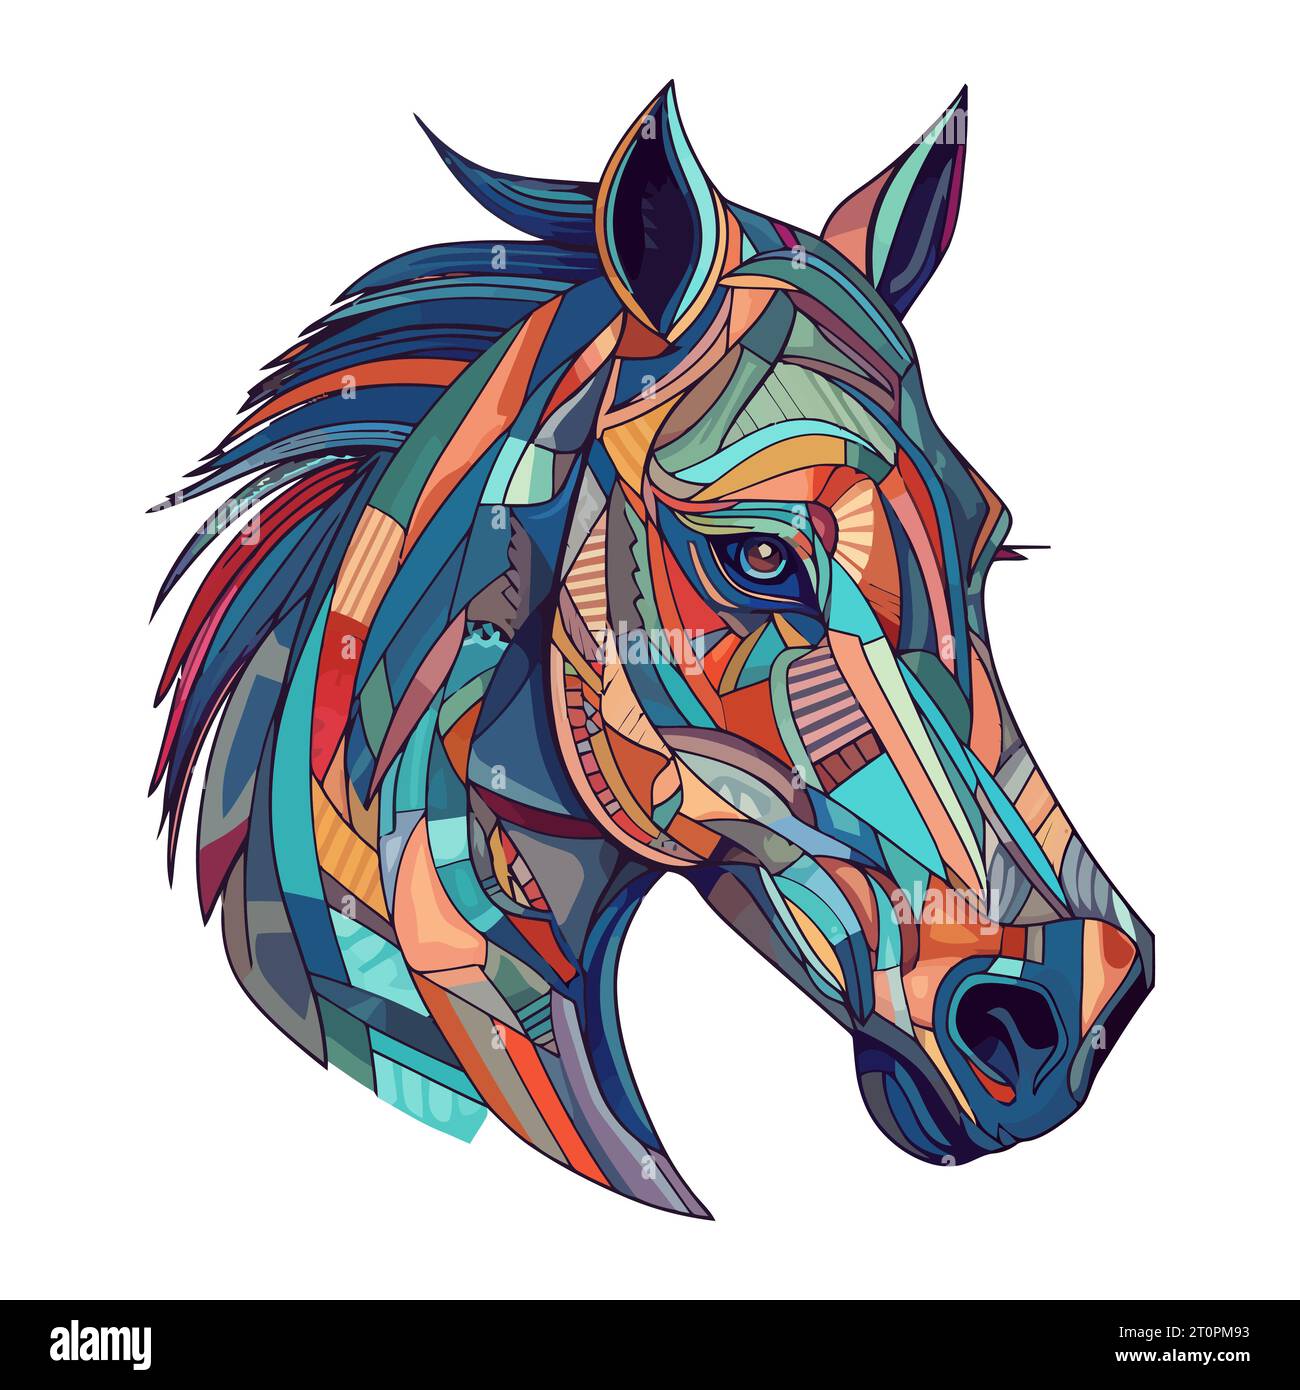 Horse painting in the style of cubism. Abstract painting of a horse in the style of Picasso. Vector illustration. Stock Vector